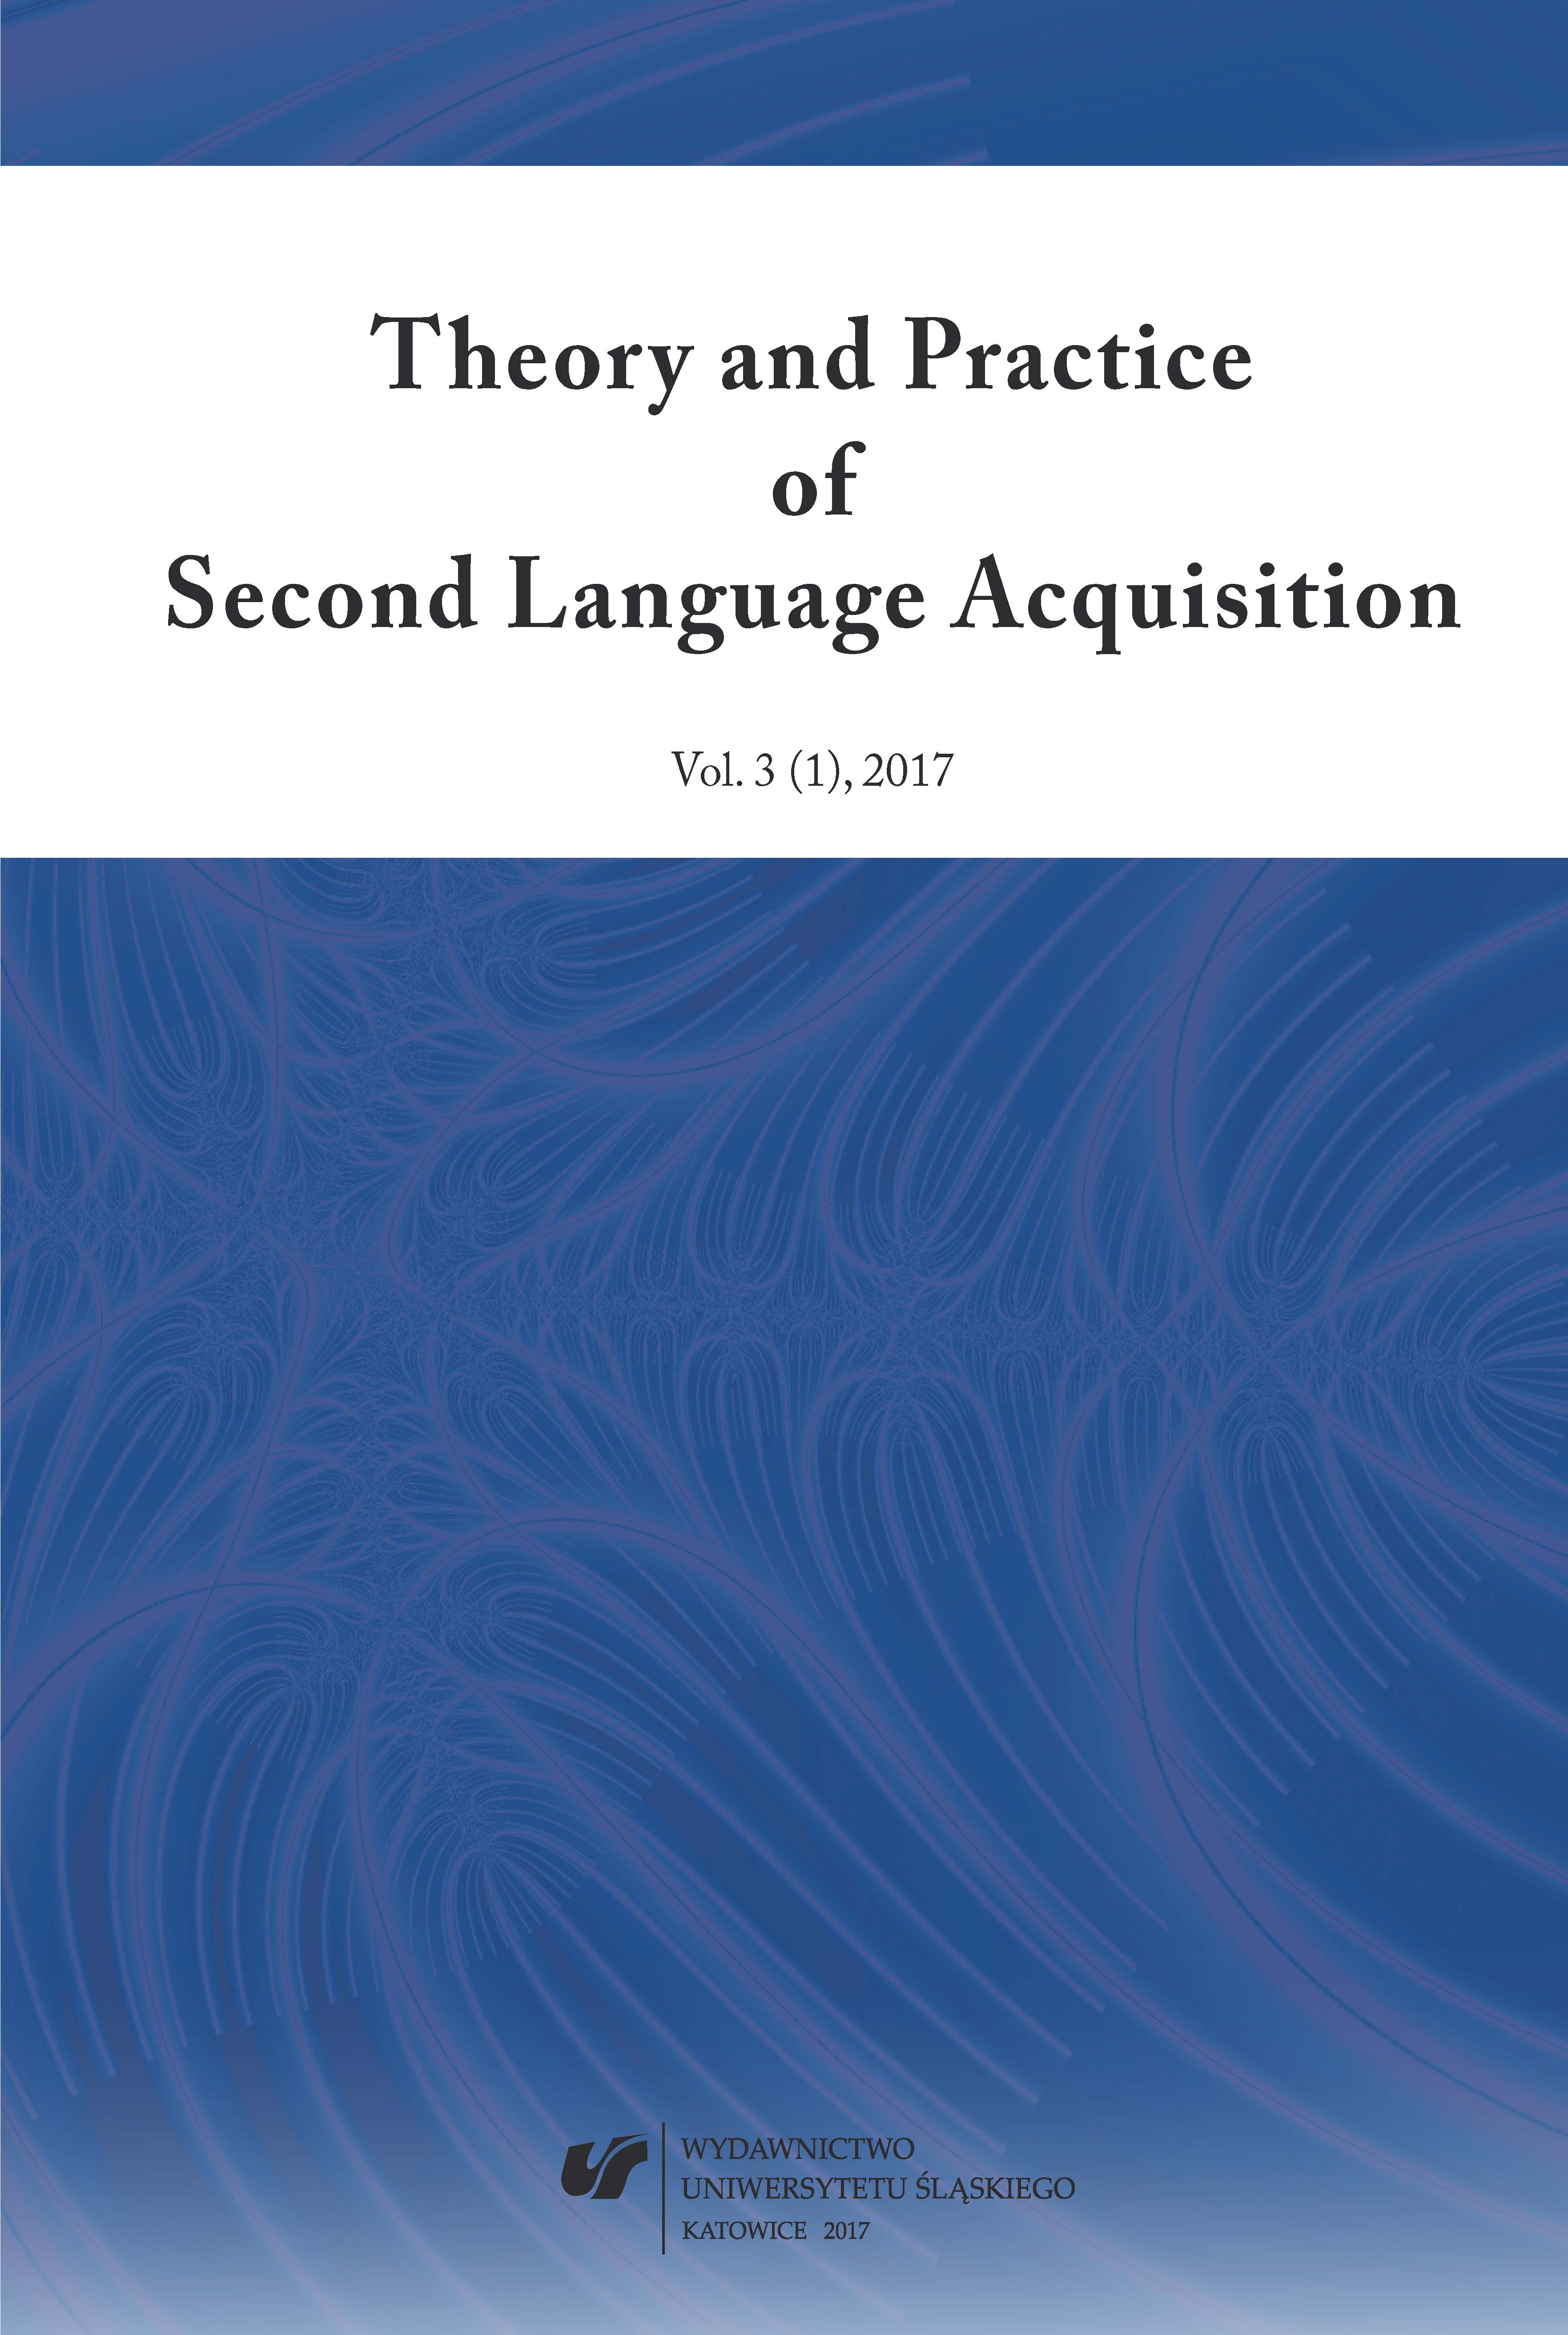 The Influence of Age and L2 on Third Language Acquisition in a Corporate Environment